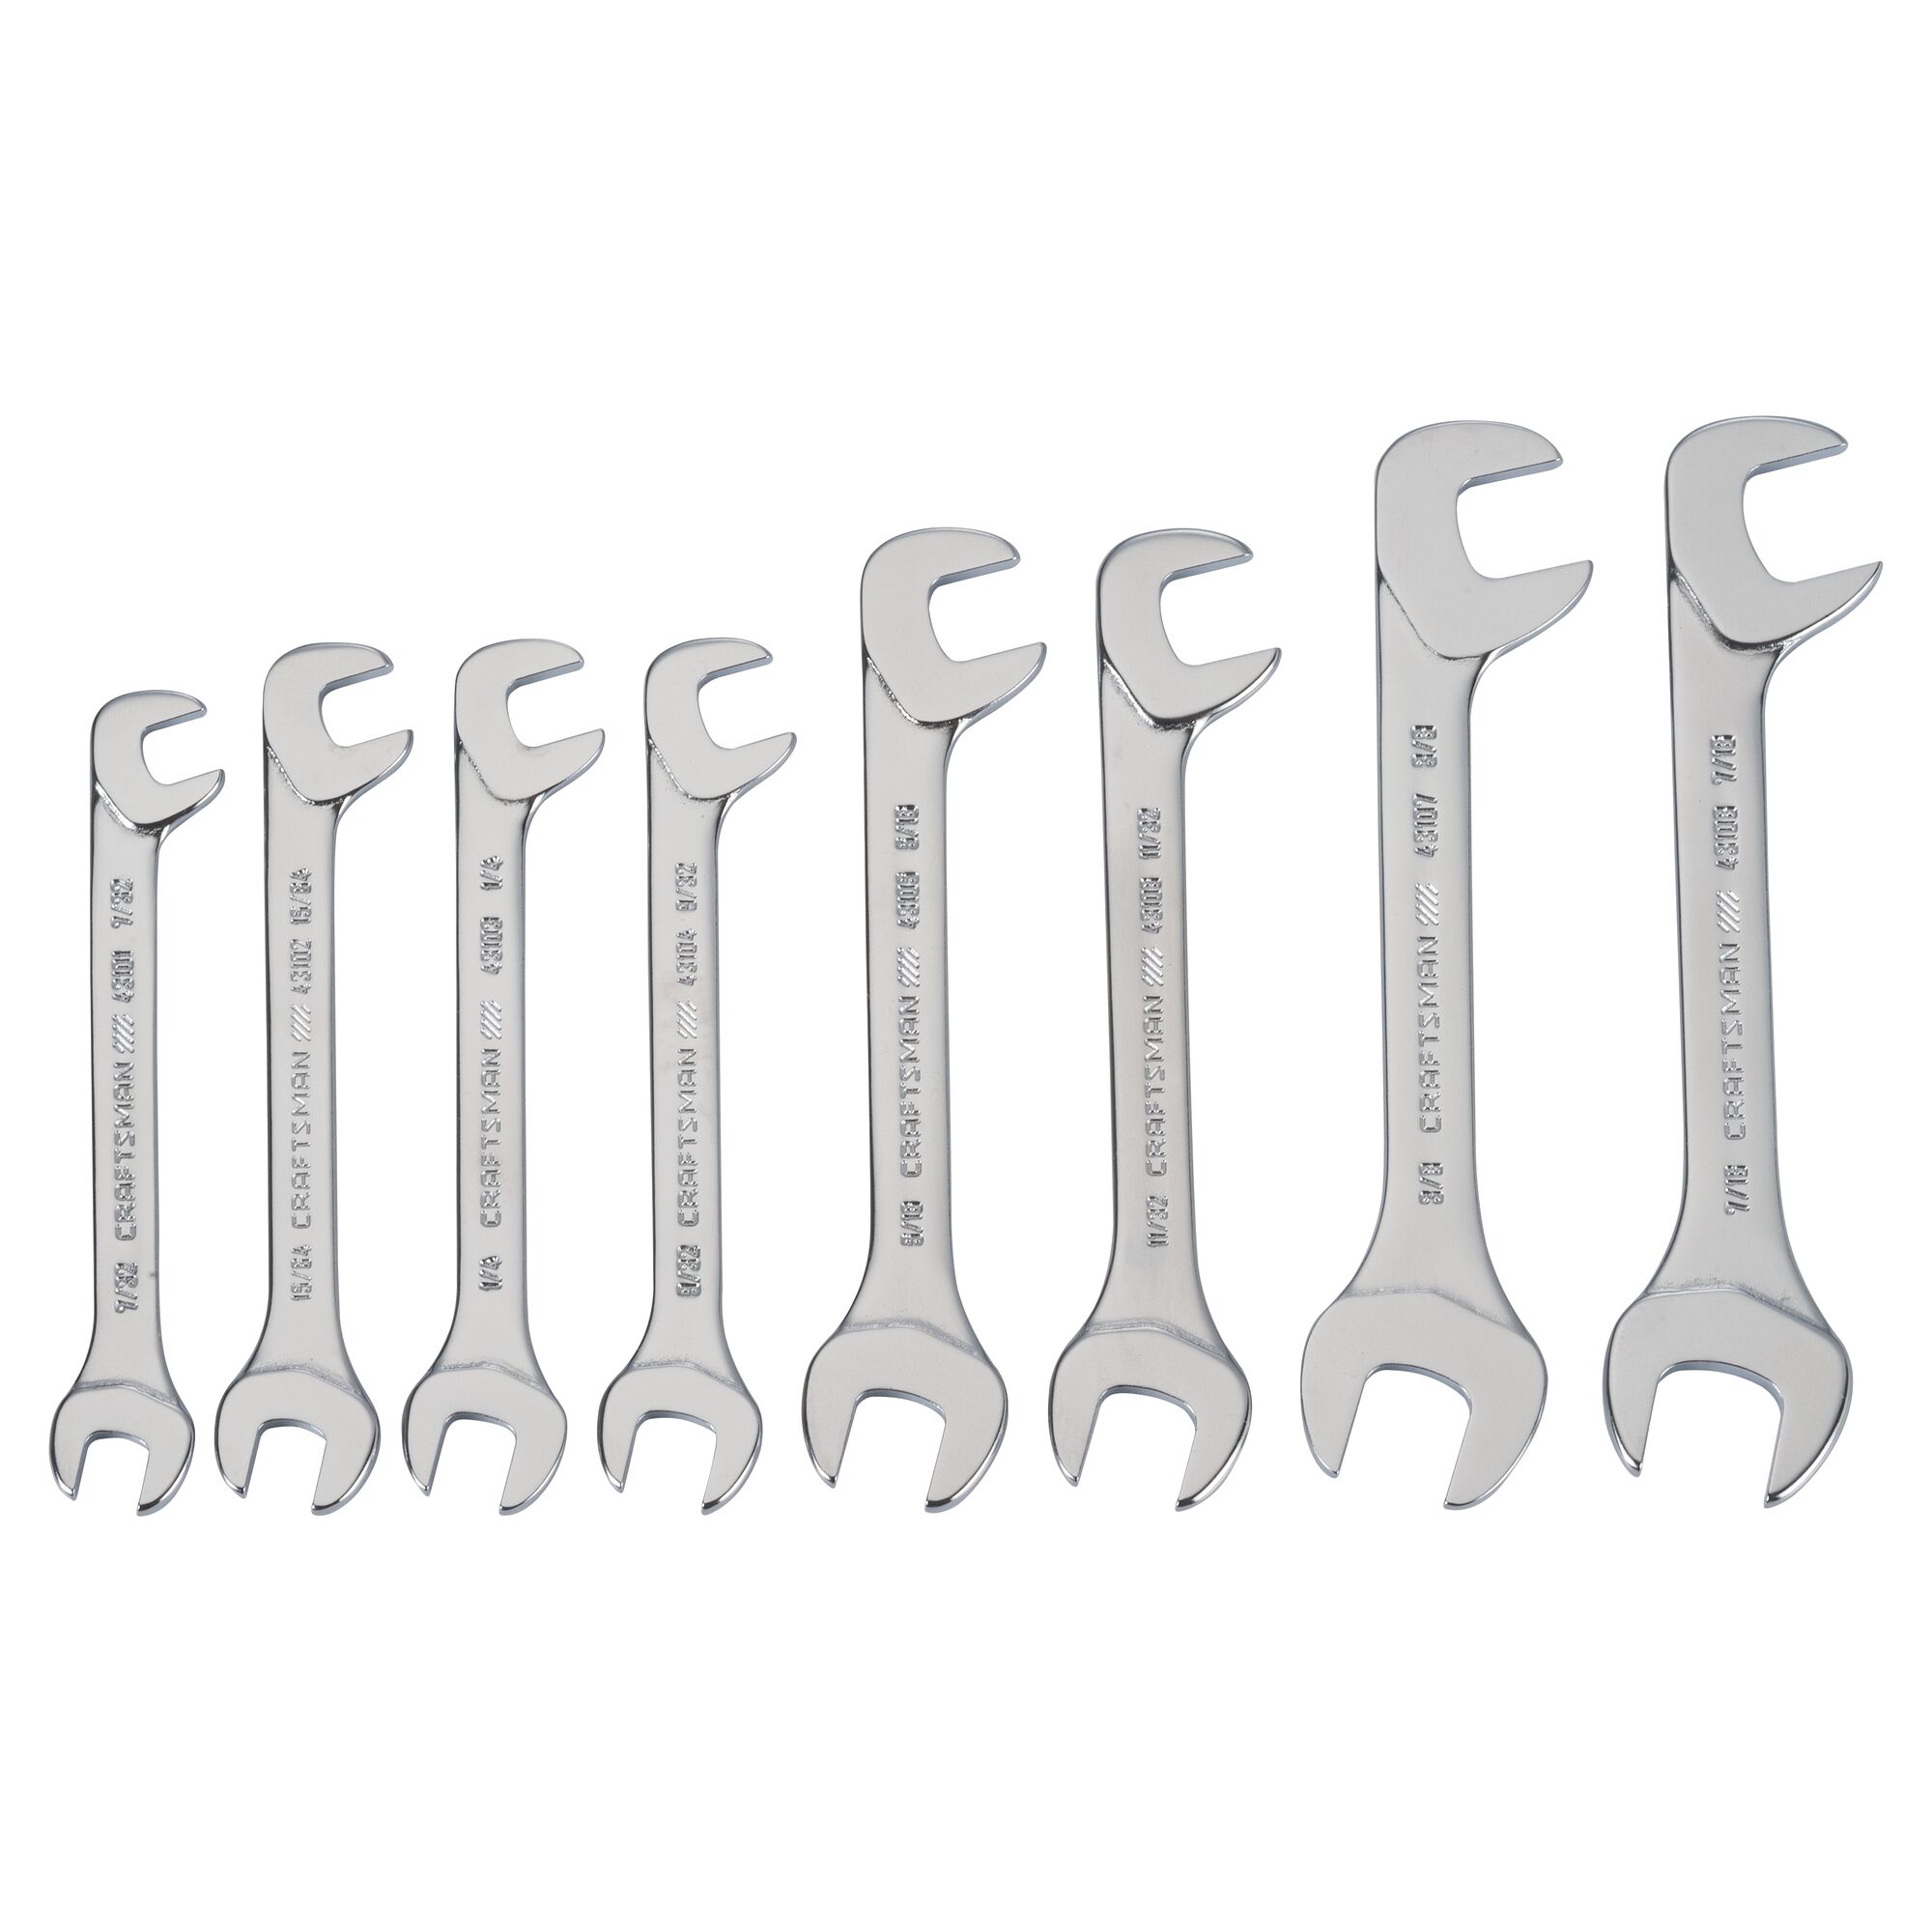 Assembled set of 8 S A E open end wrenches.